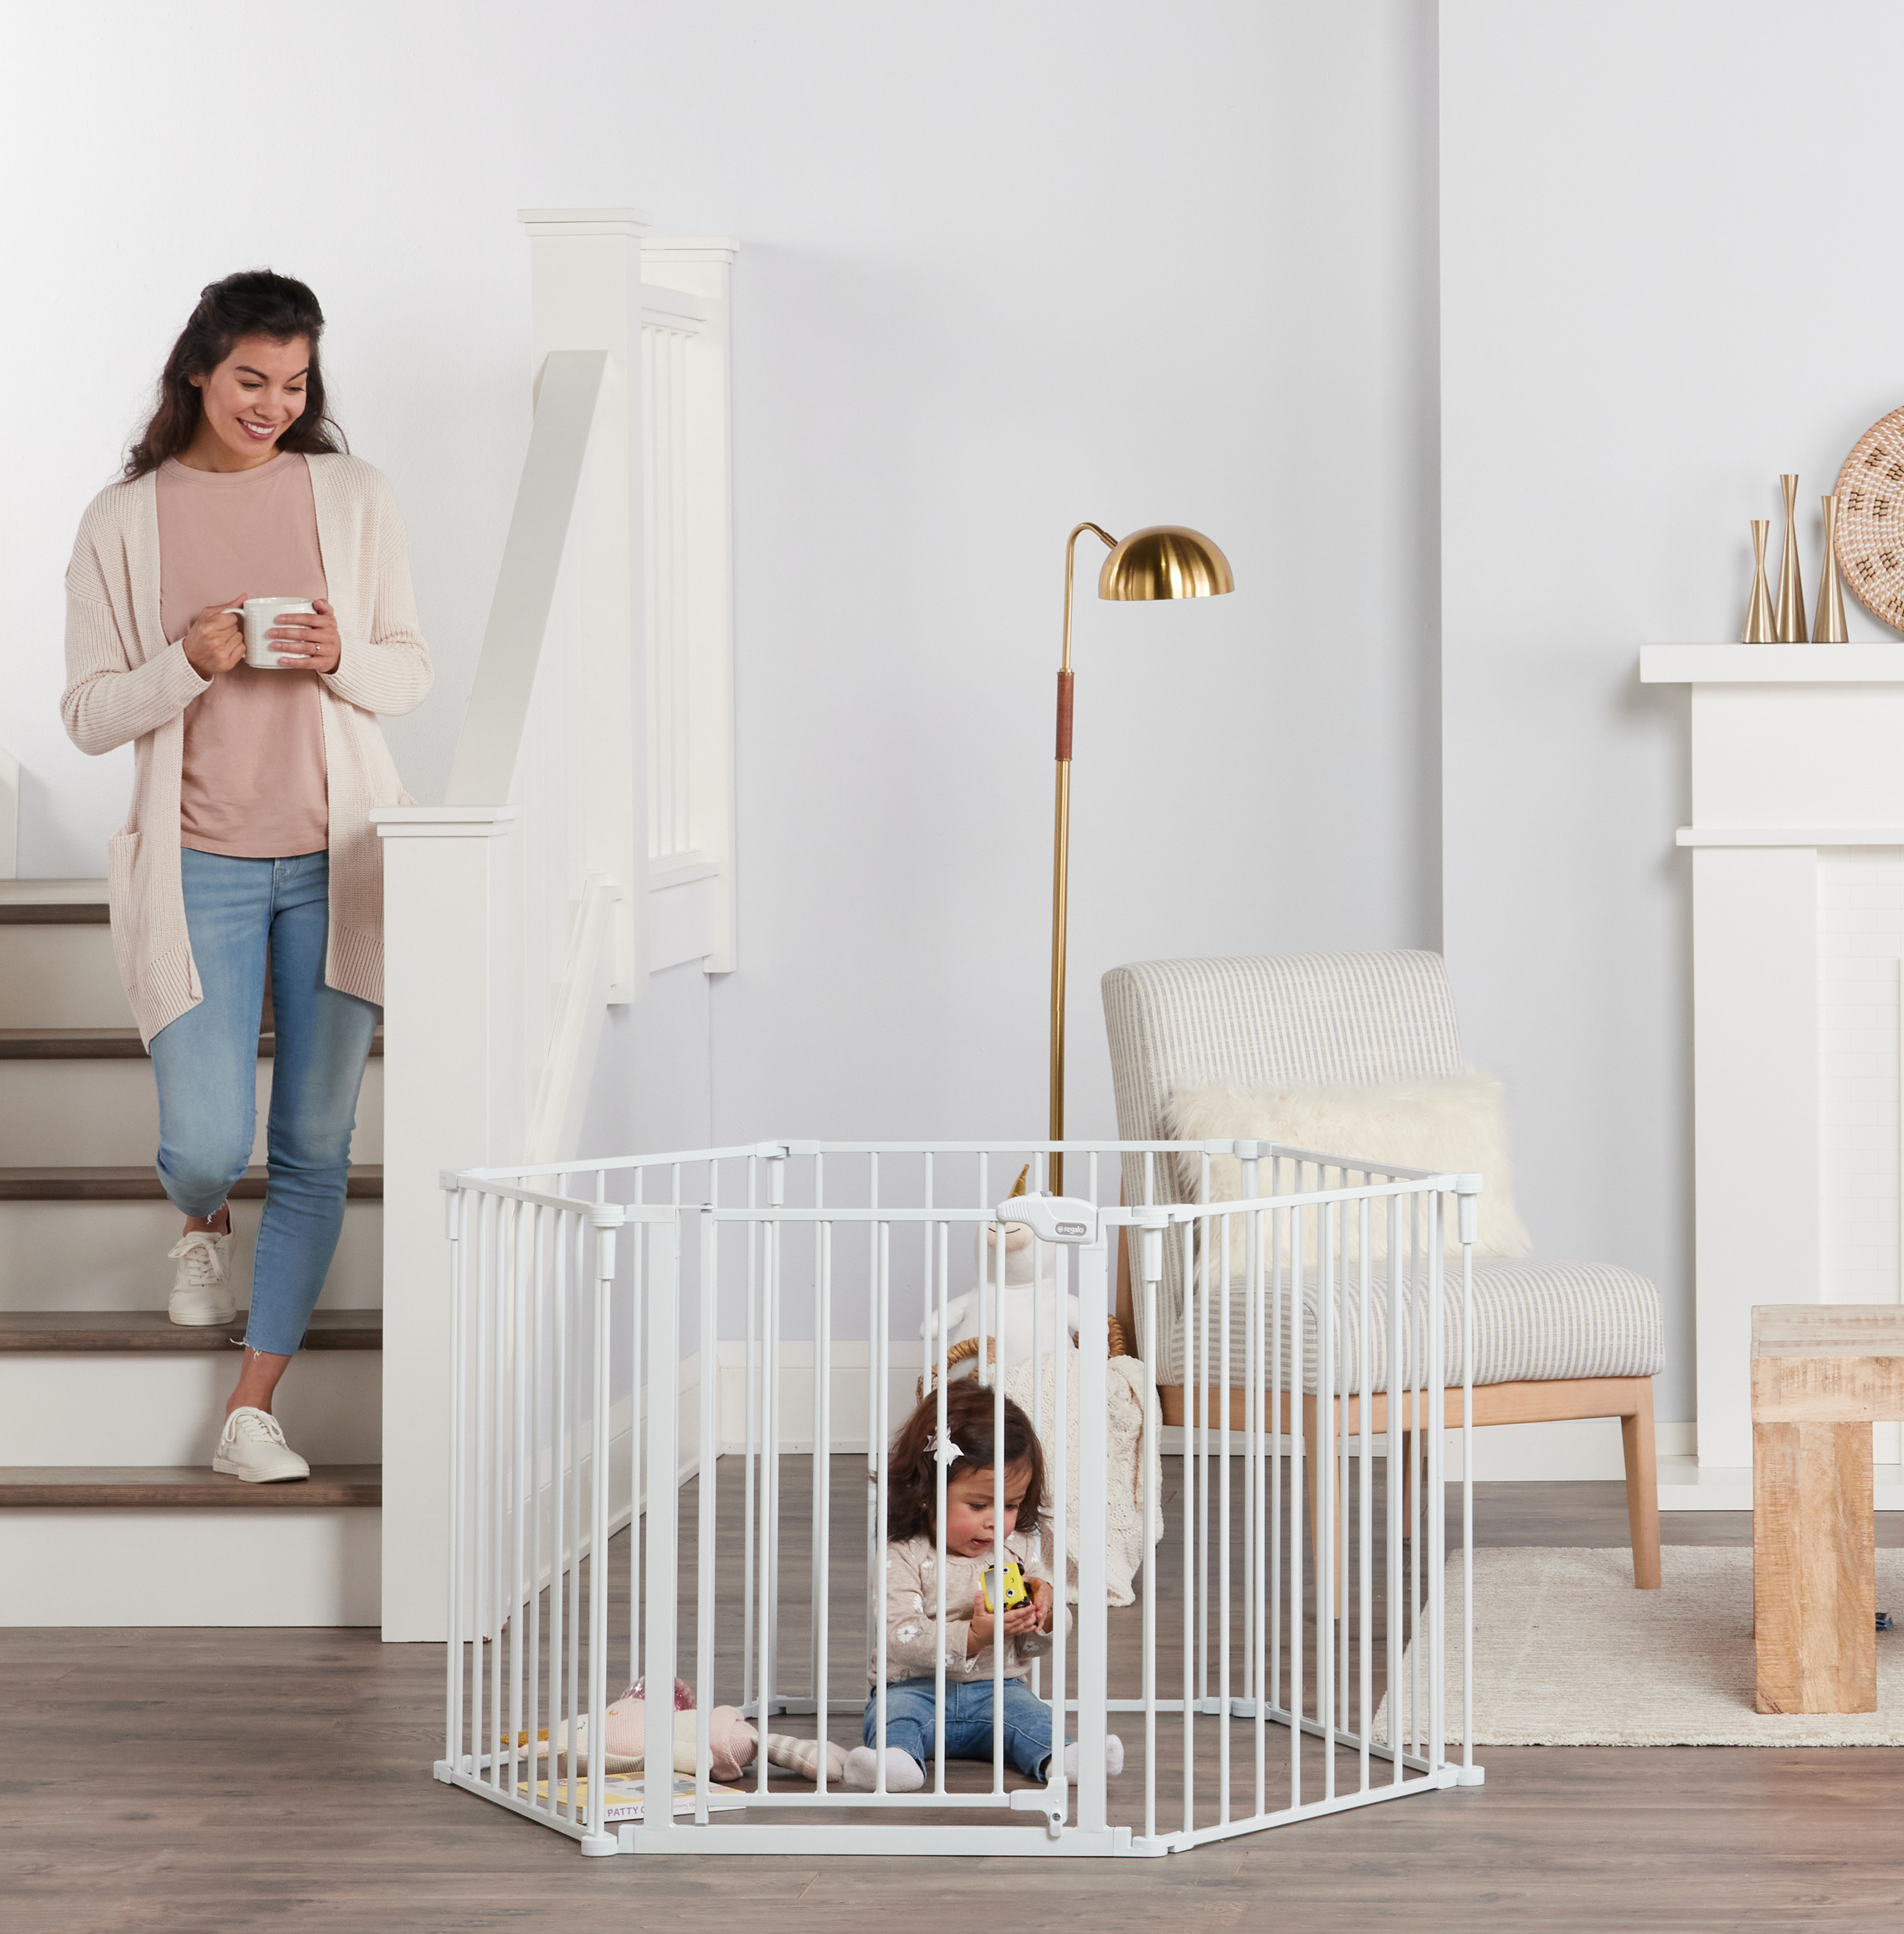 Regalo Super Wide Baby Gate, Features Play Yard Option, White, 144", Age Group 6-24 Months - image 3 of 7